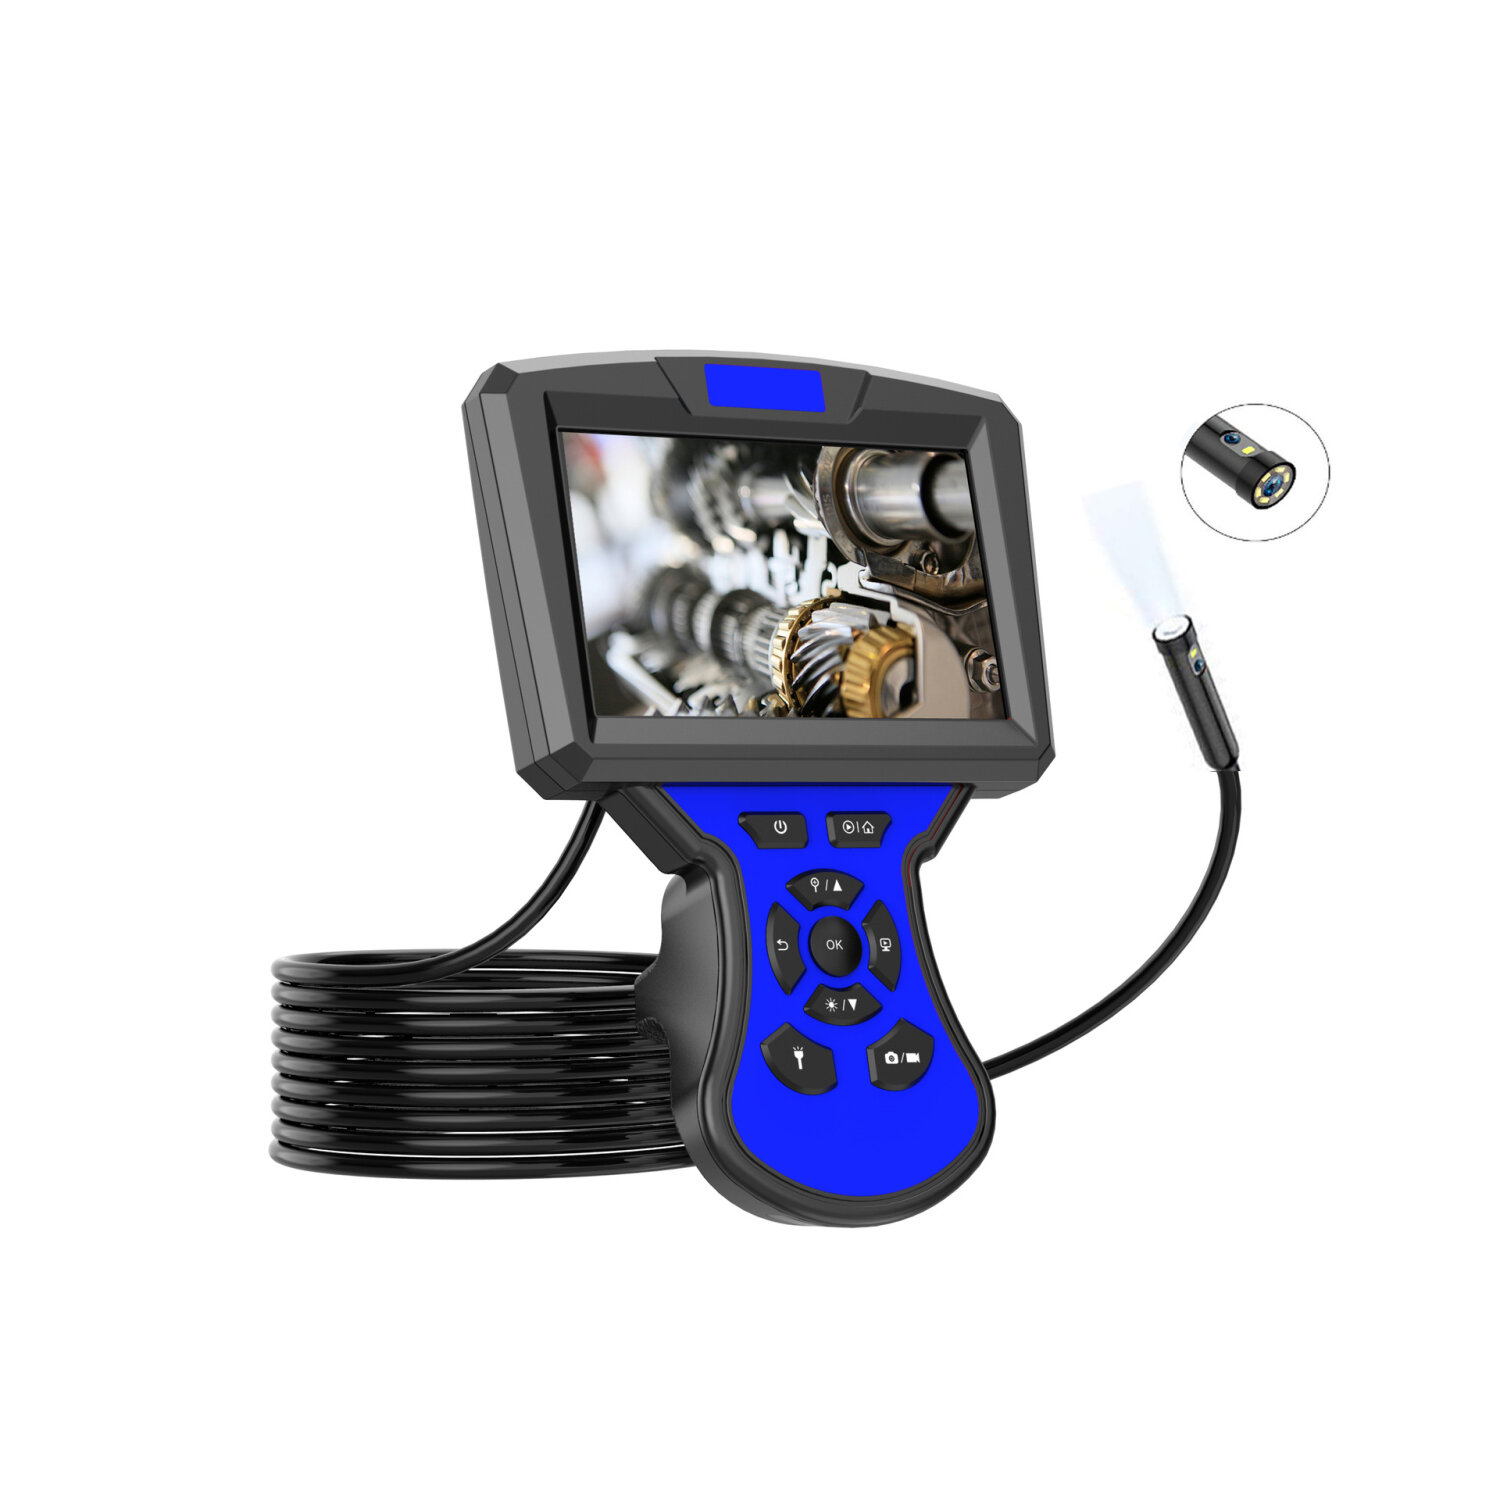 

5 Inch Industrial Endoscope with Screen 1080P Waterproof Camera Dual Lens Car Air Conditioning Duct Inspection